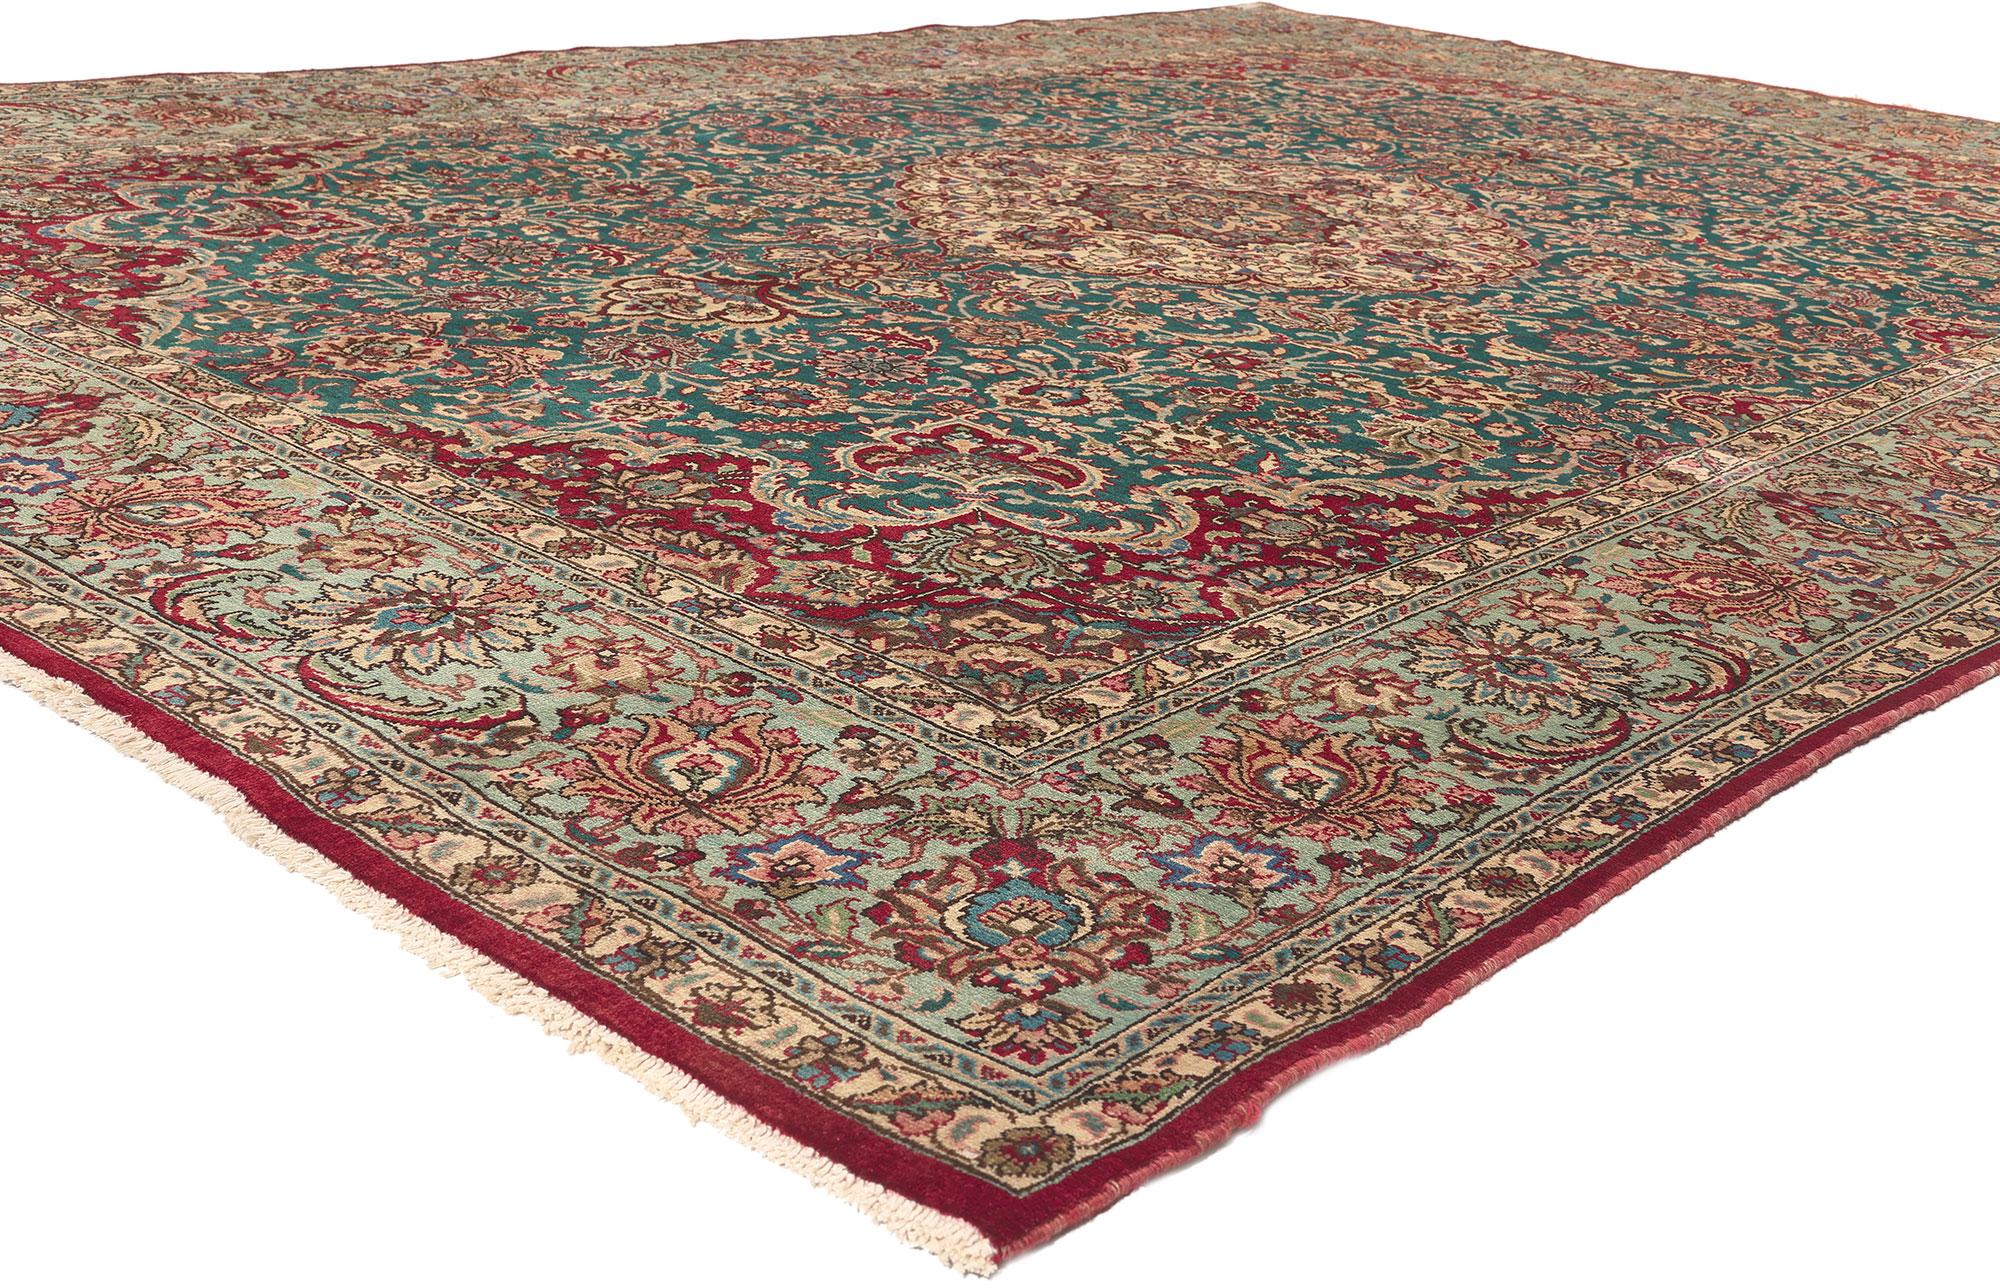 75351 Vintage Persian Tabriz Rug, 08'01 x 11'06.
Regal charm meets elegant sophistication in this hand knotted wool vintage Persian Tabriz rug. The decadent botanical detailing and rich color palette woven into this piece work together resulting in